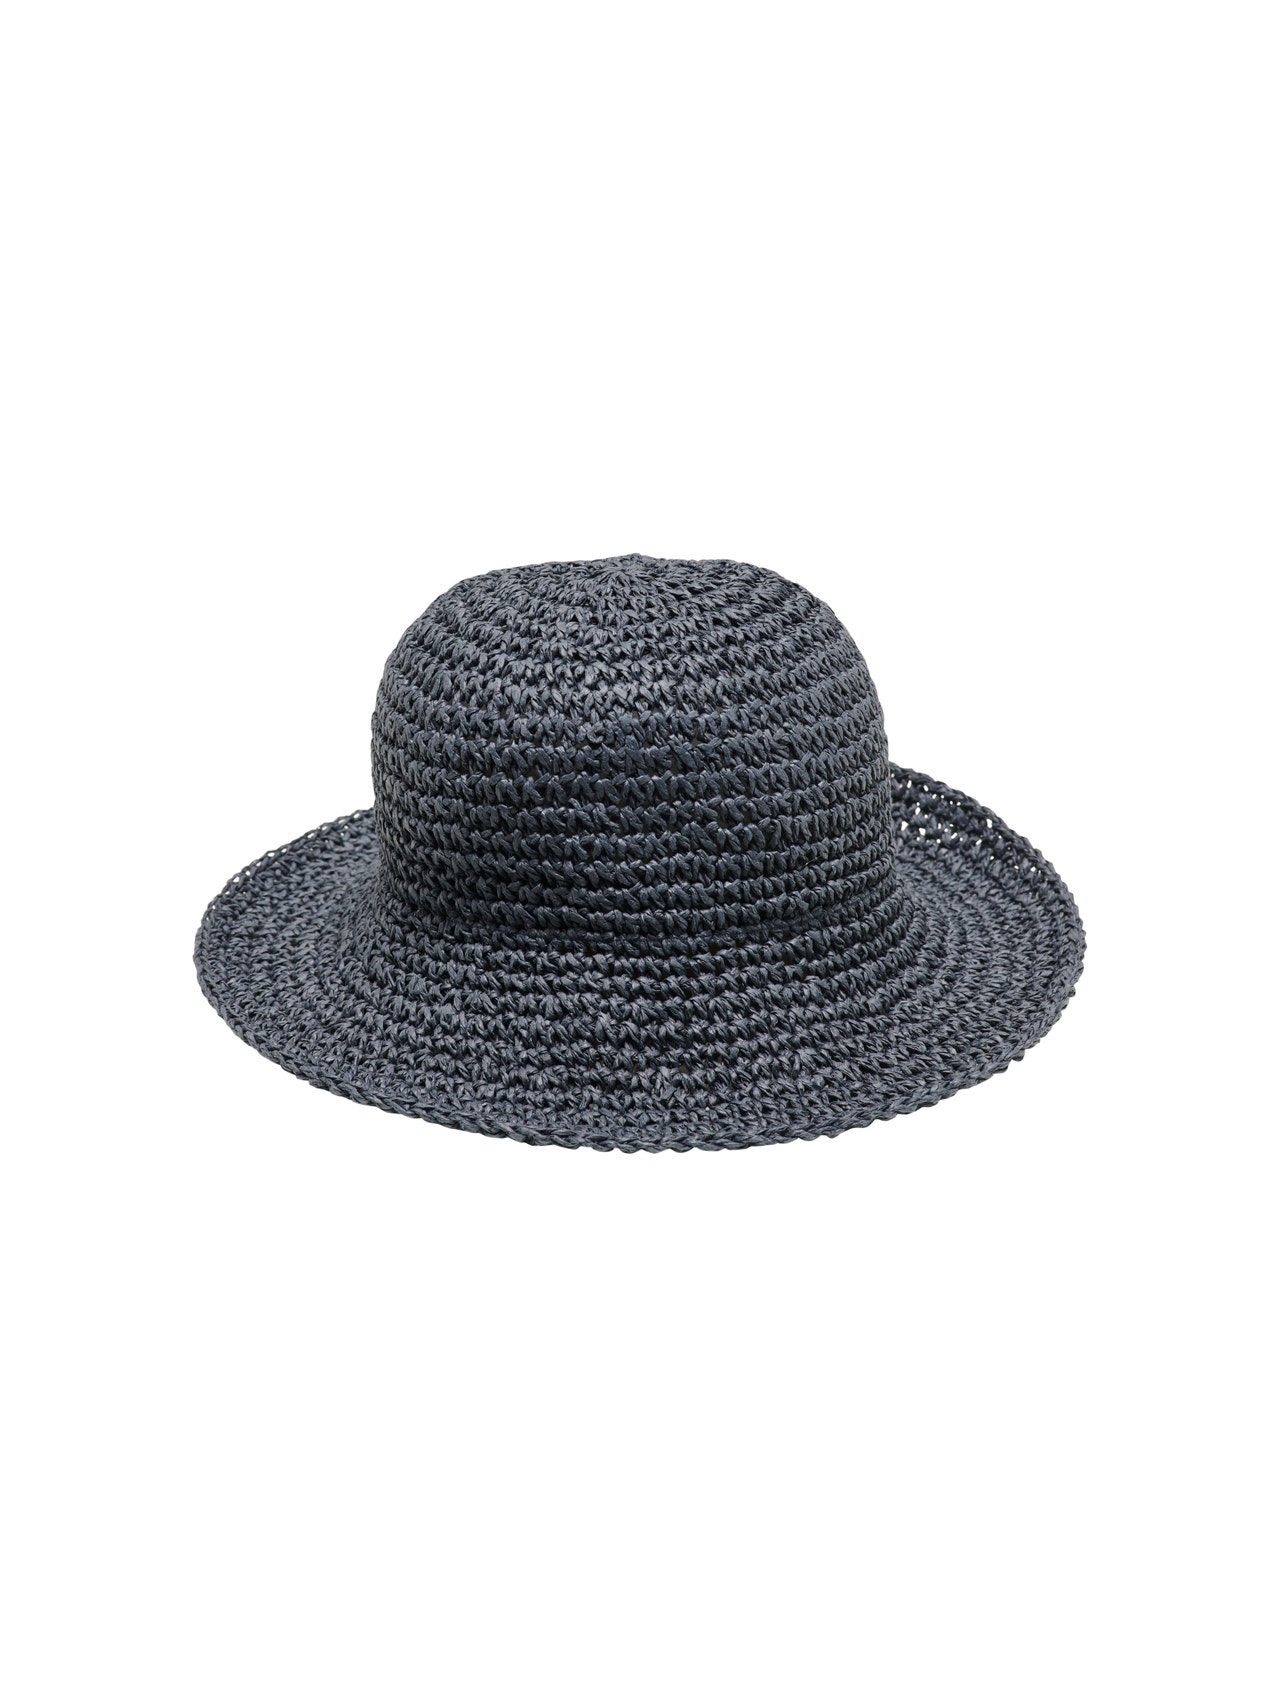 ONLY Beach hat -Naval Academy - 15313321